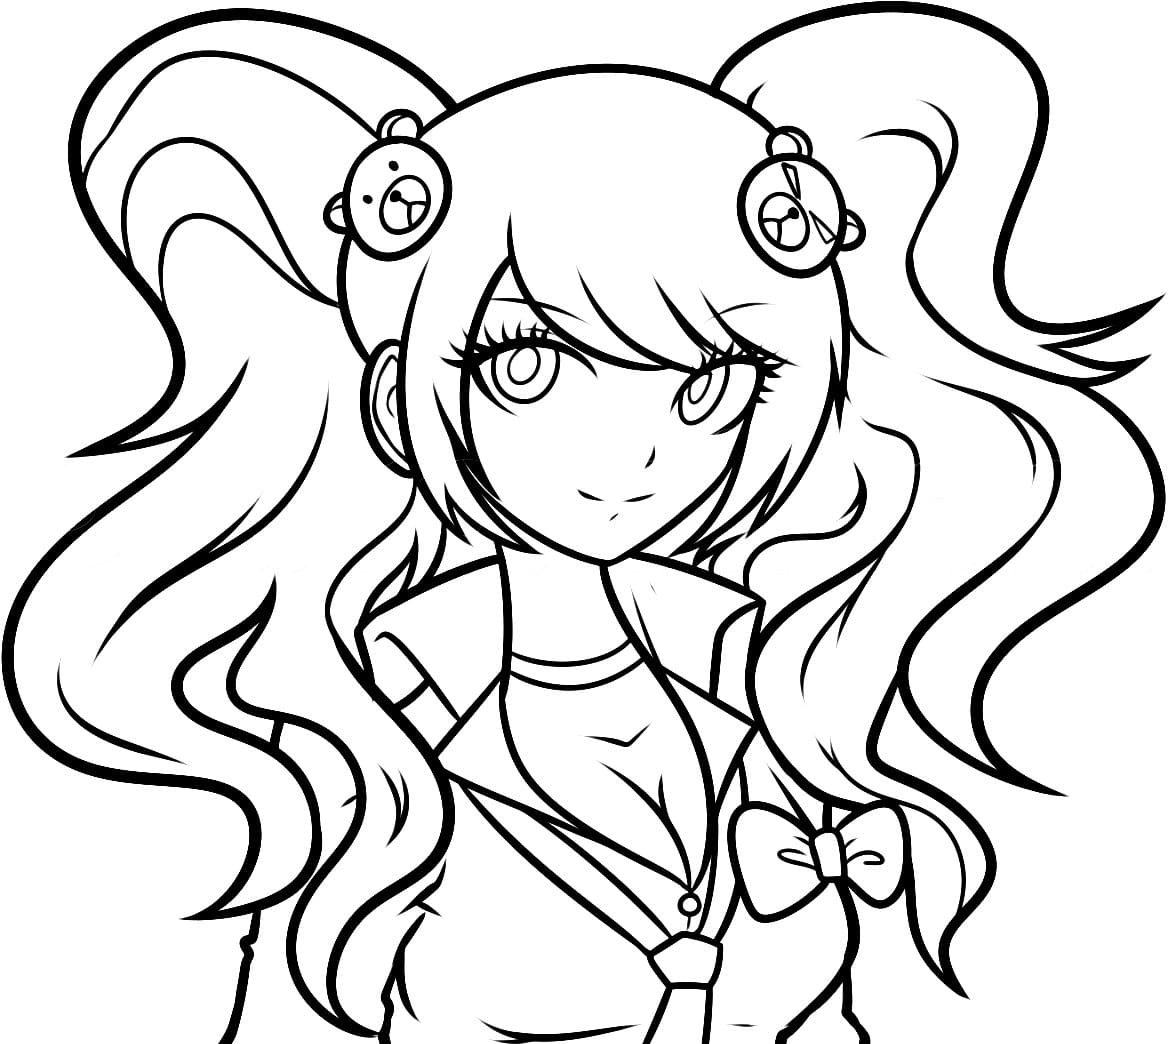 Danganronpa Coloring Pages — 80 Printable Coloring Pages